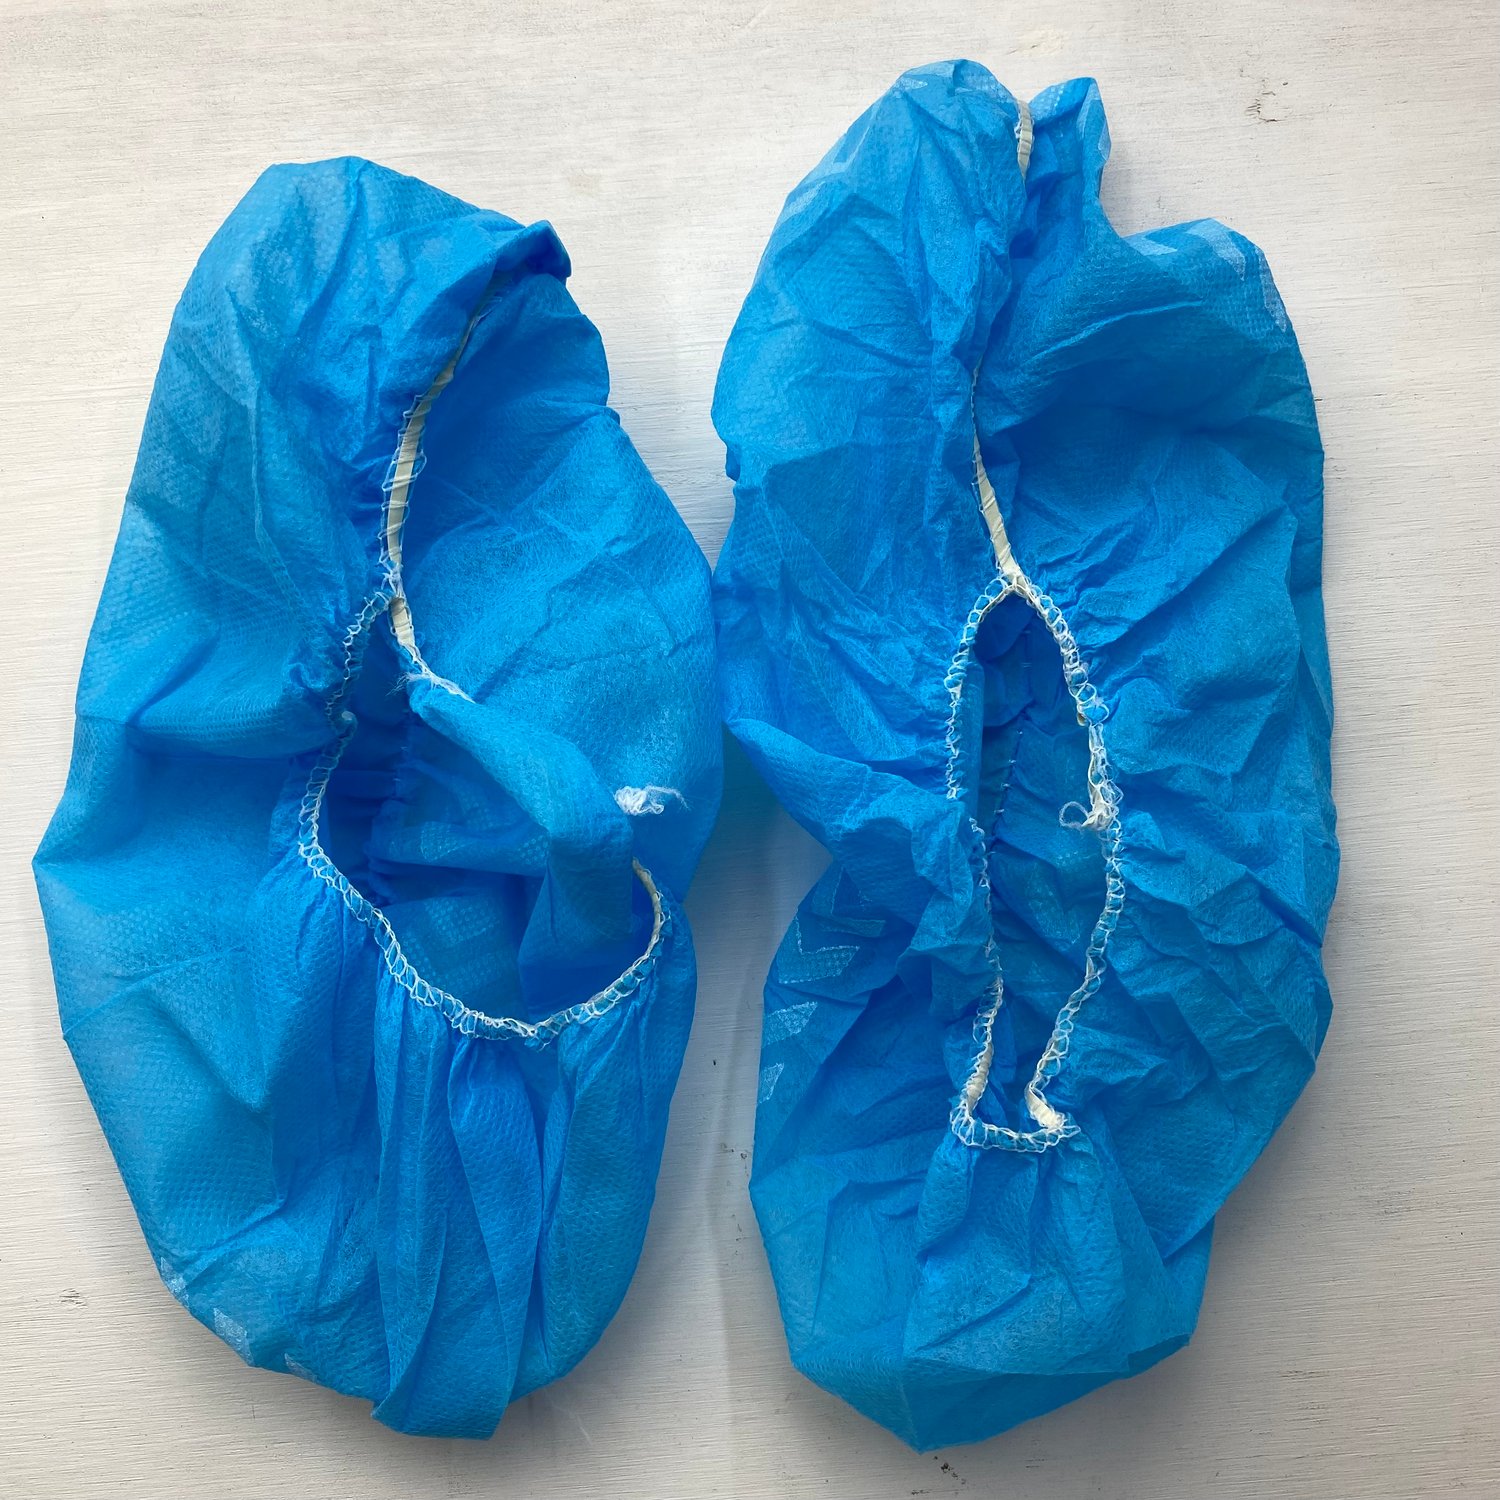 Image of Ambitex Blue Polypropylene Disposable Shoe Covers 100ct 50 pr